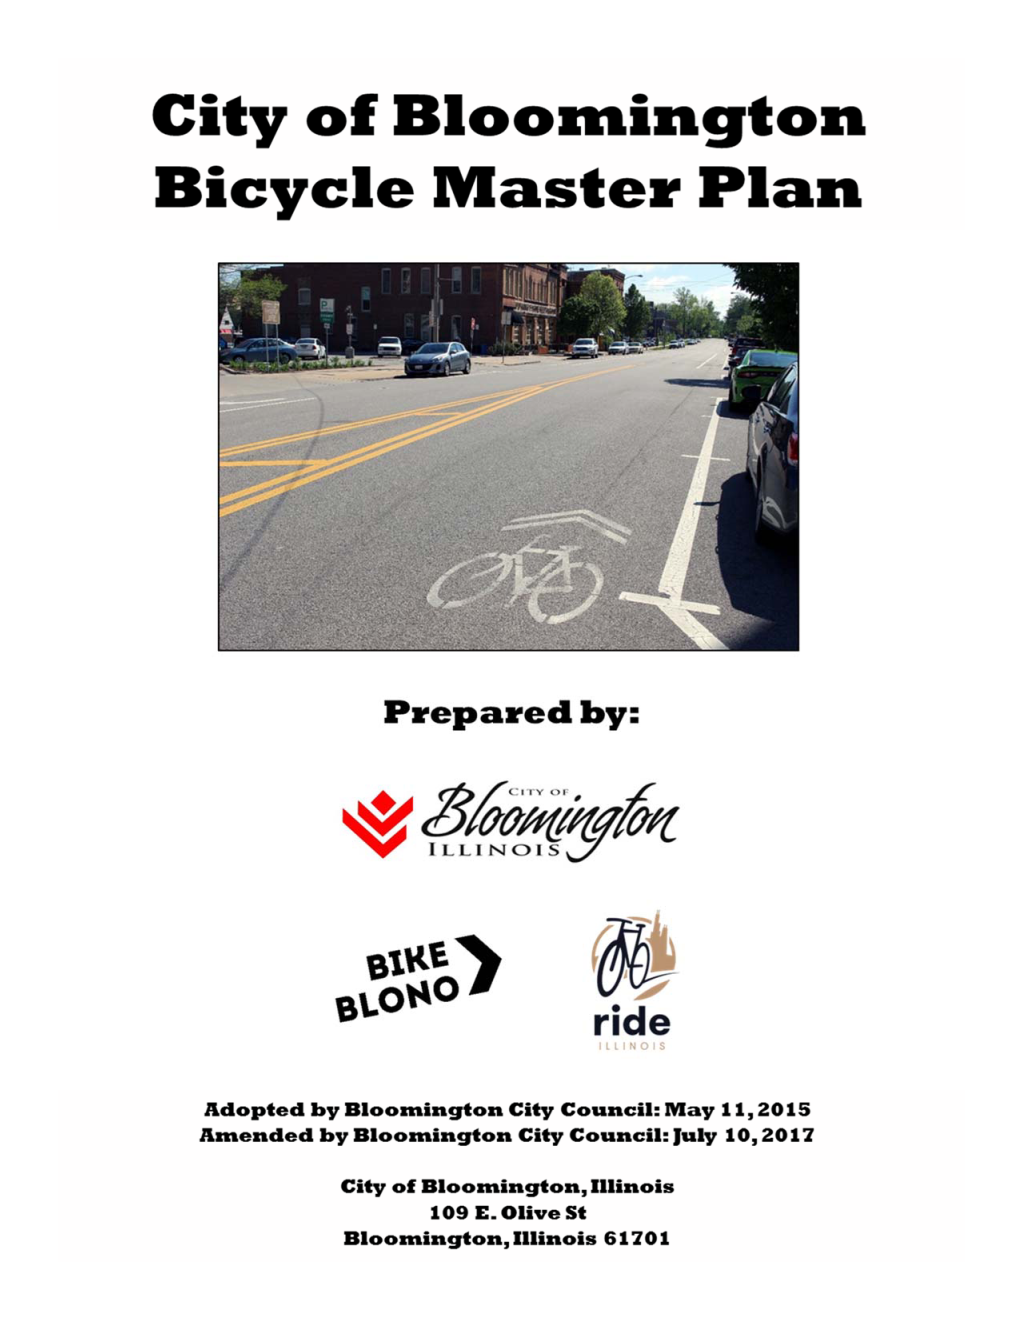 Bicycle Master Plan with These Pages